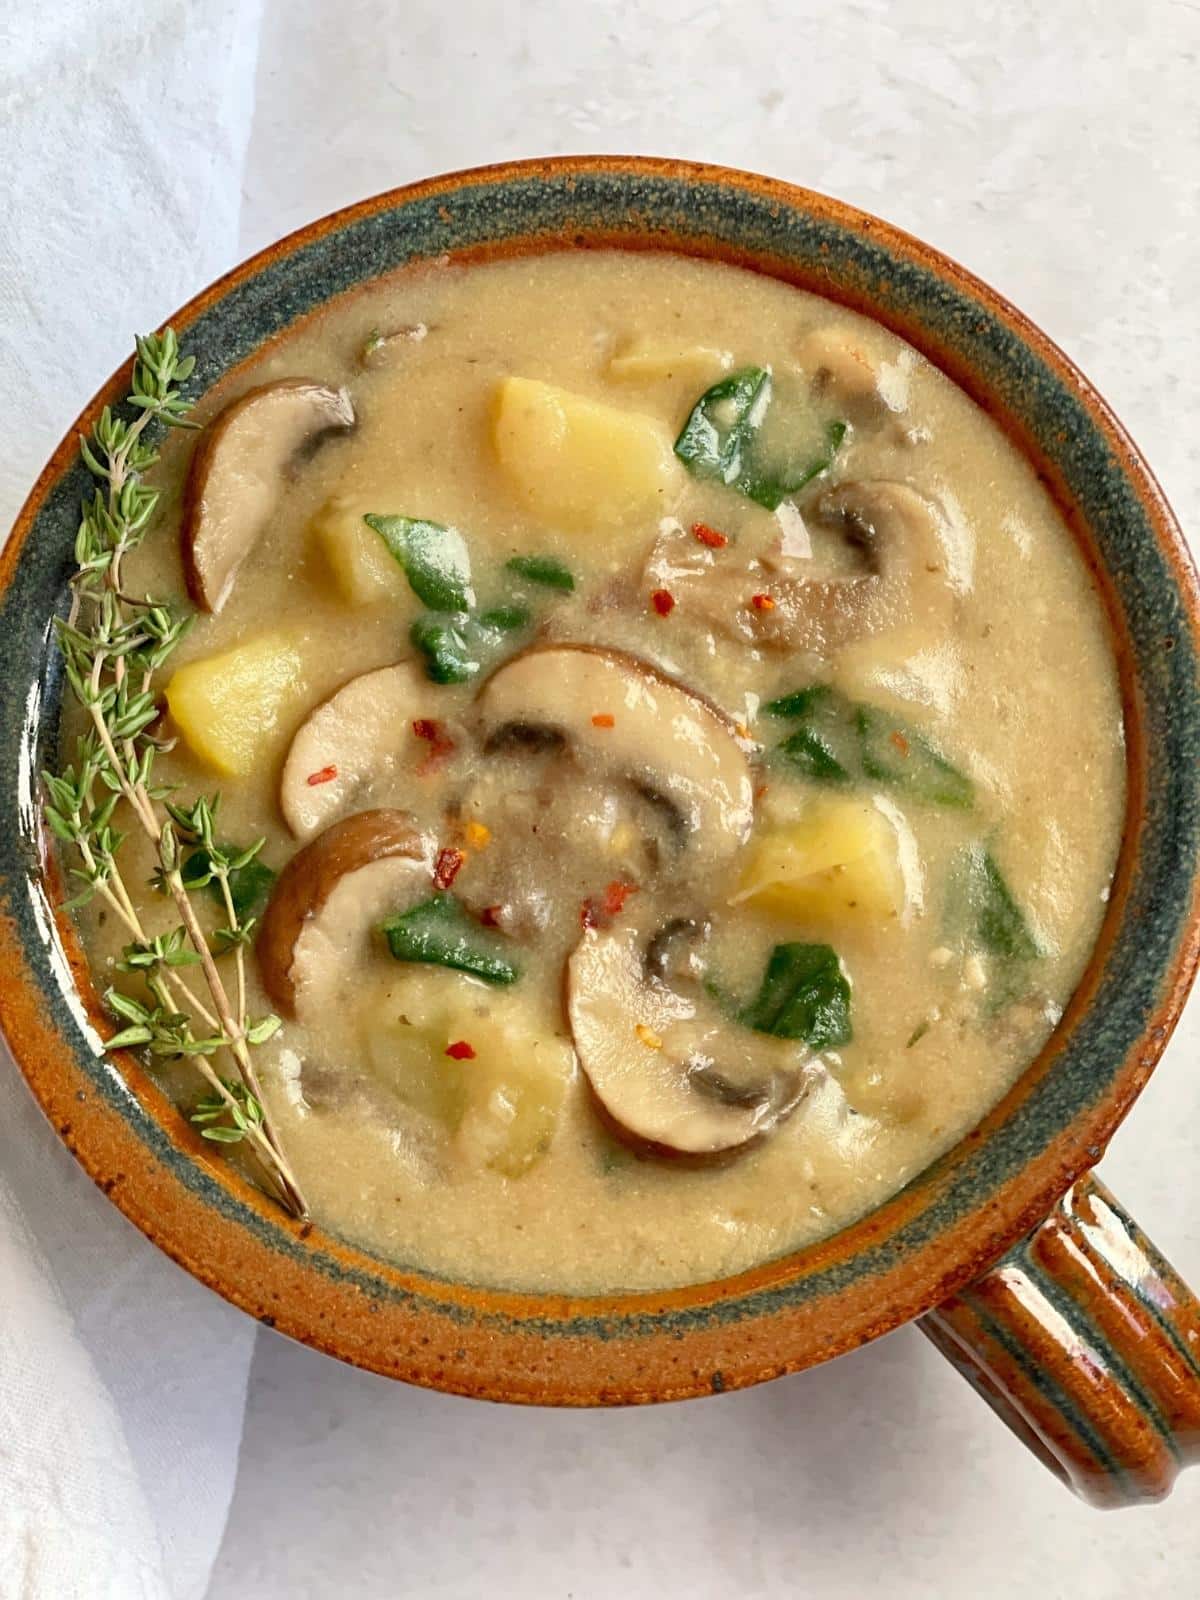 Soup with mushrooms and potatoes.